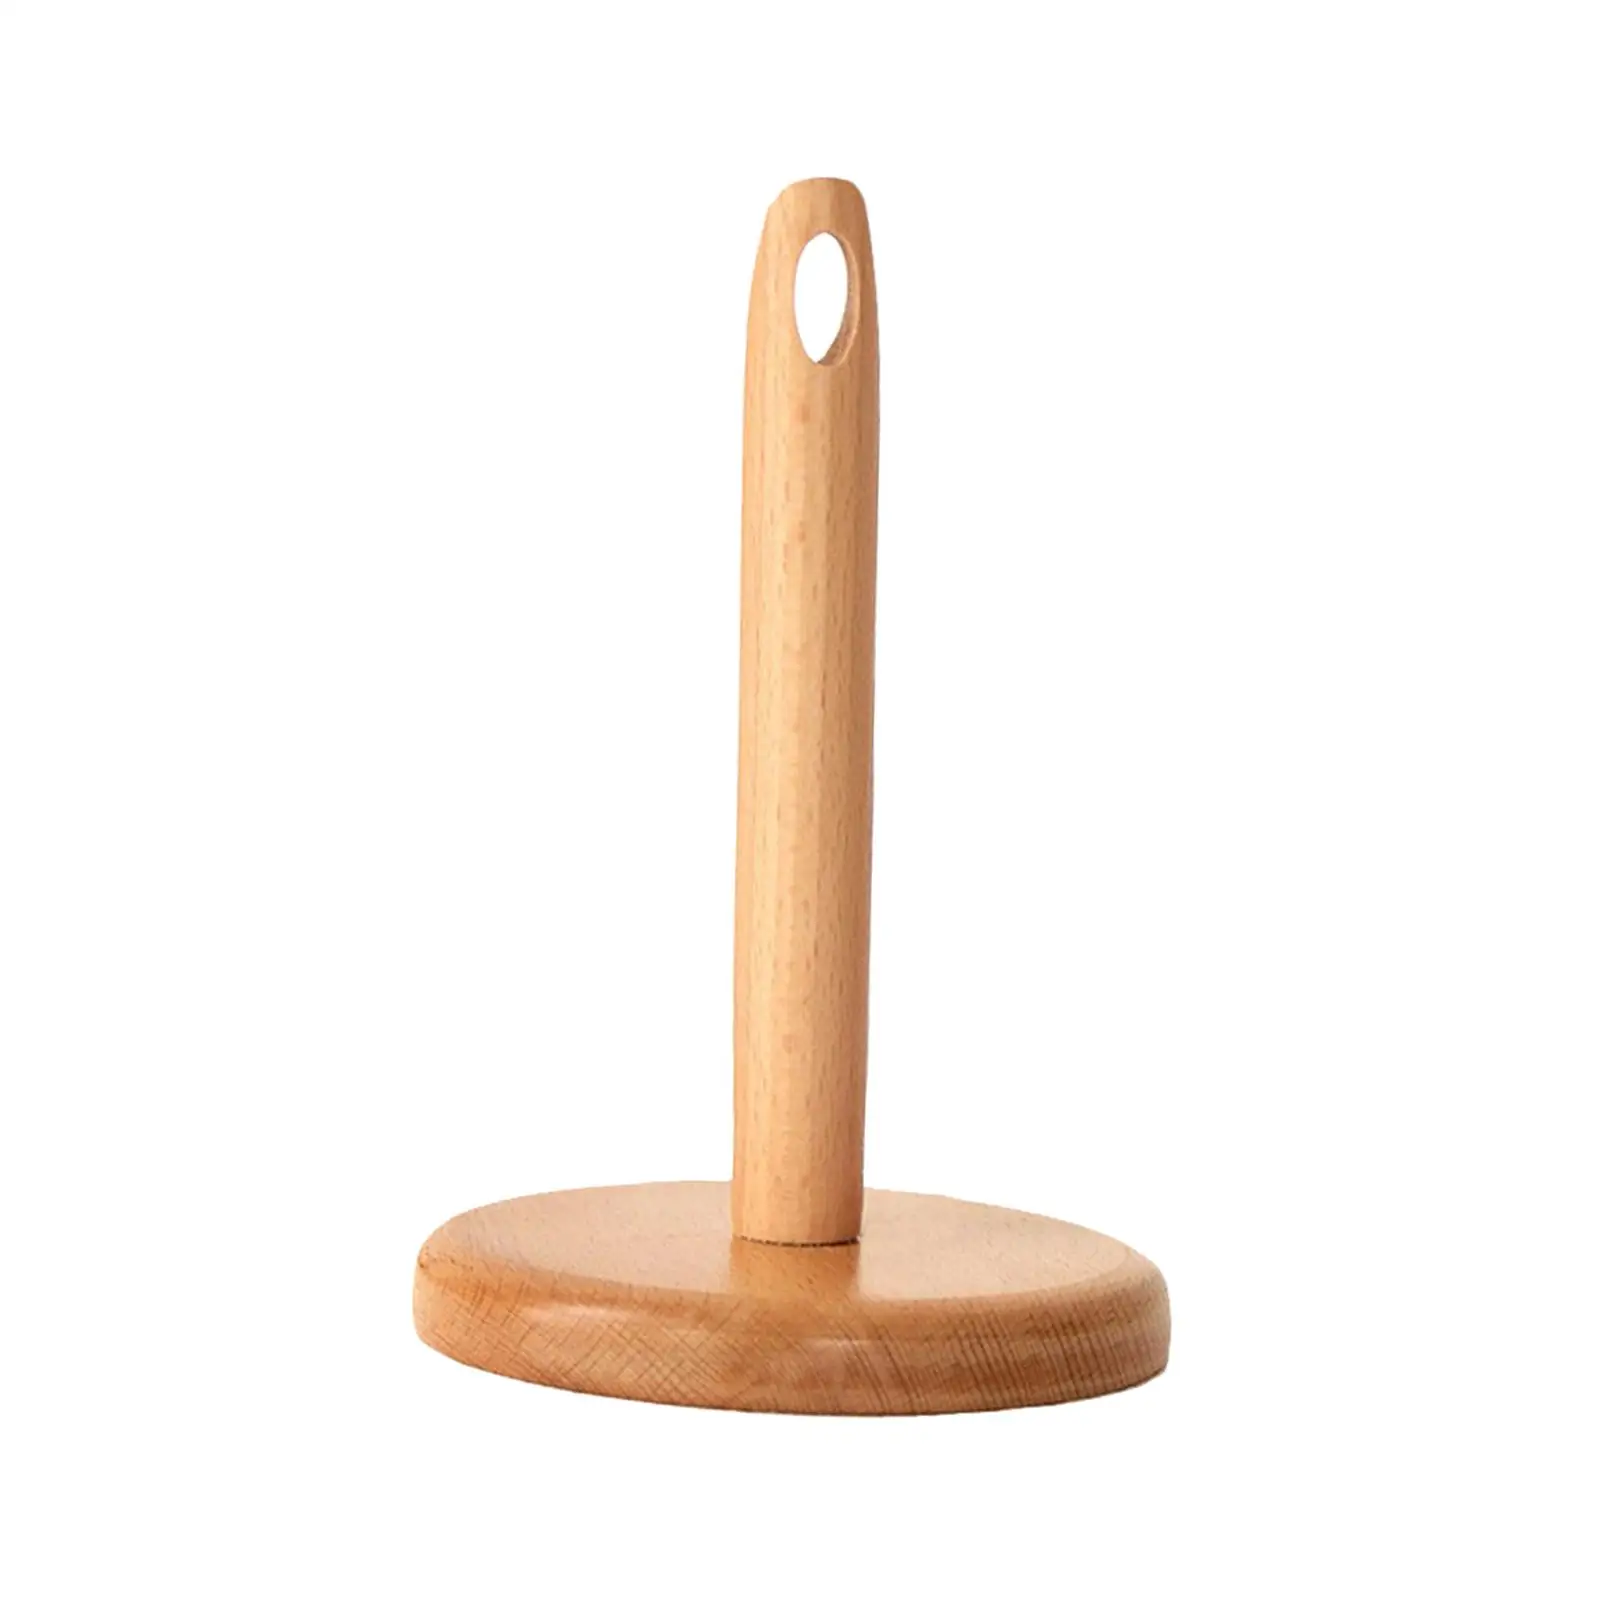 Yarn Holder Wooden Stand Paper Roll Holder Revolving Spindle Sewing Tool Wool Holder for Knitting Household Craft Home Accessory